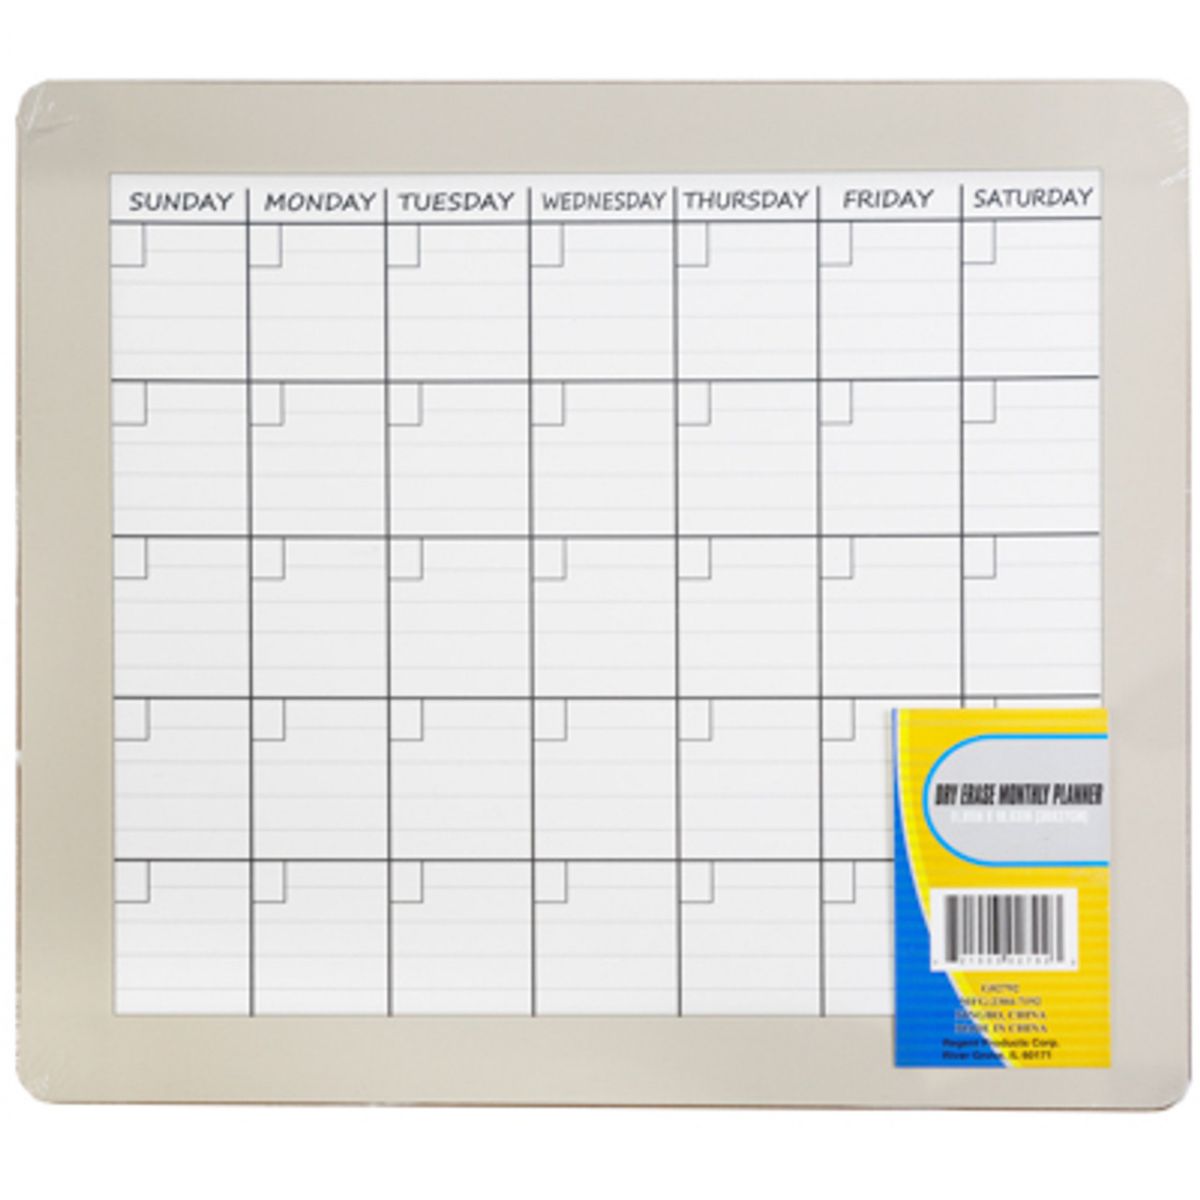 36 Pieces of Dry Erase Calendar Board Mdf11.81x10.63in Shrink/label Mdf Comply